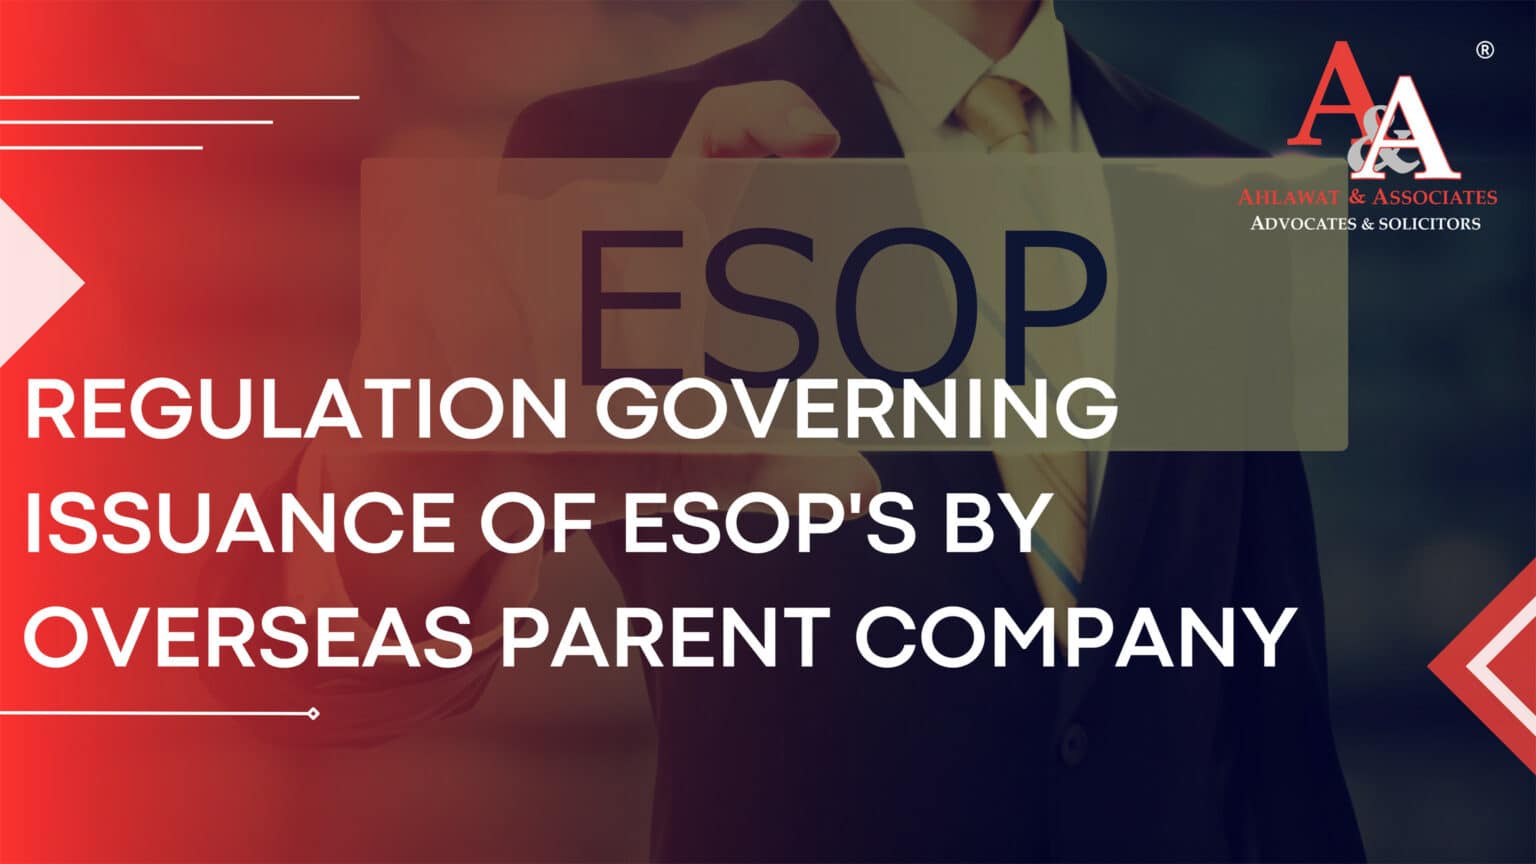 REGULATION GOVERNING ISSUANCE OF ESOPs BY OVERSEAS PARENT COMPANY